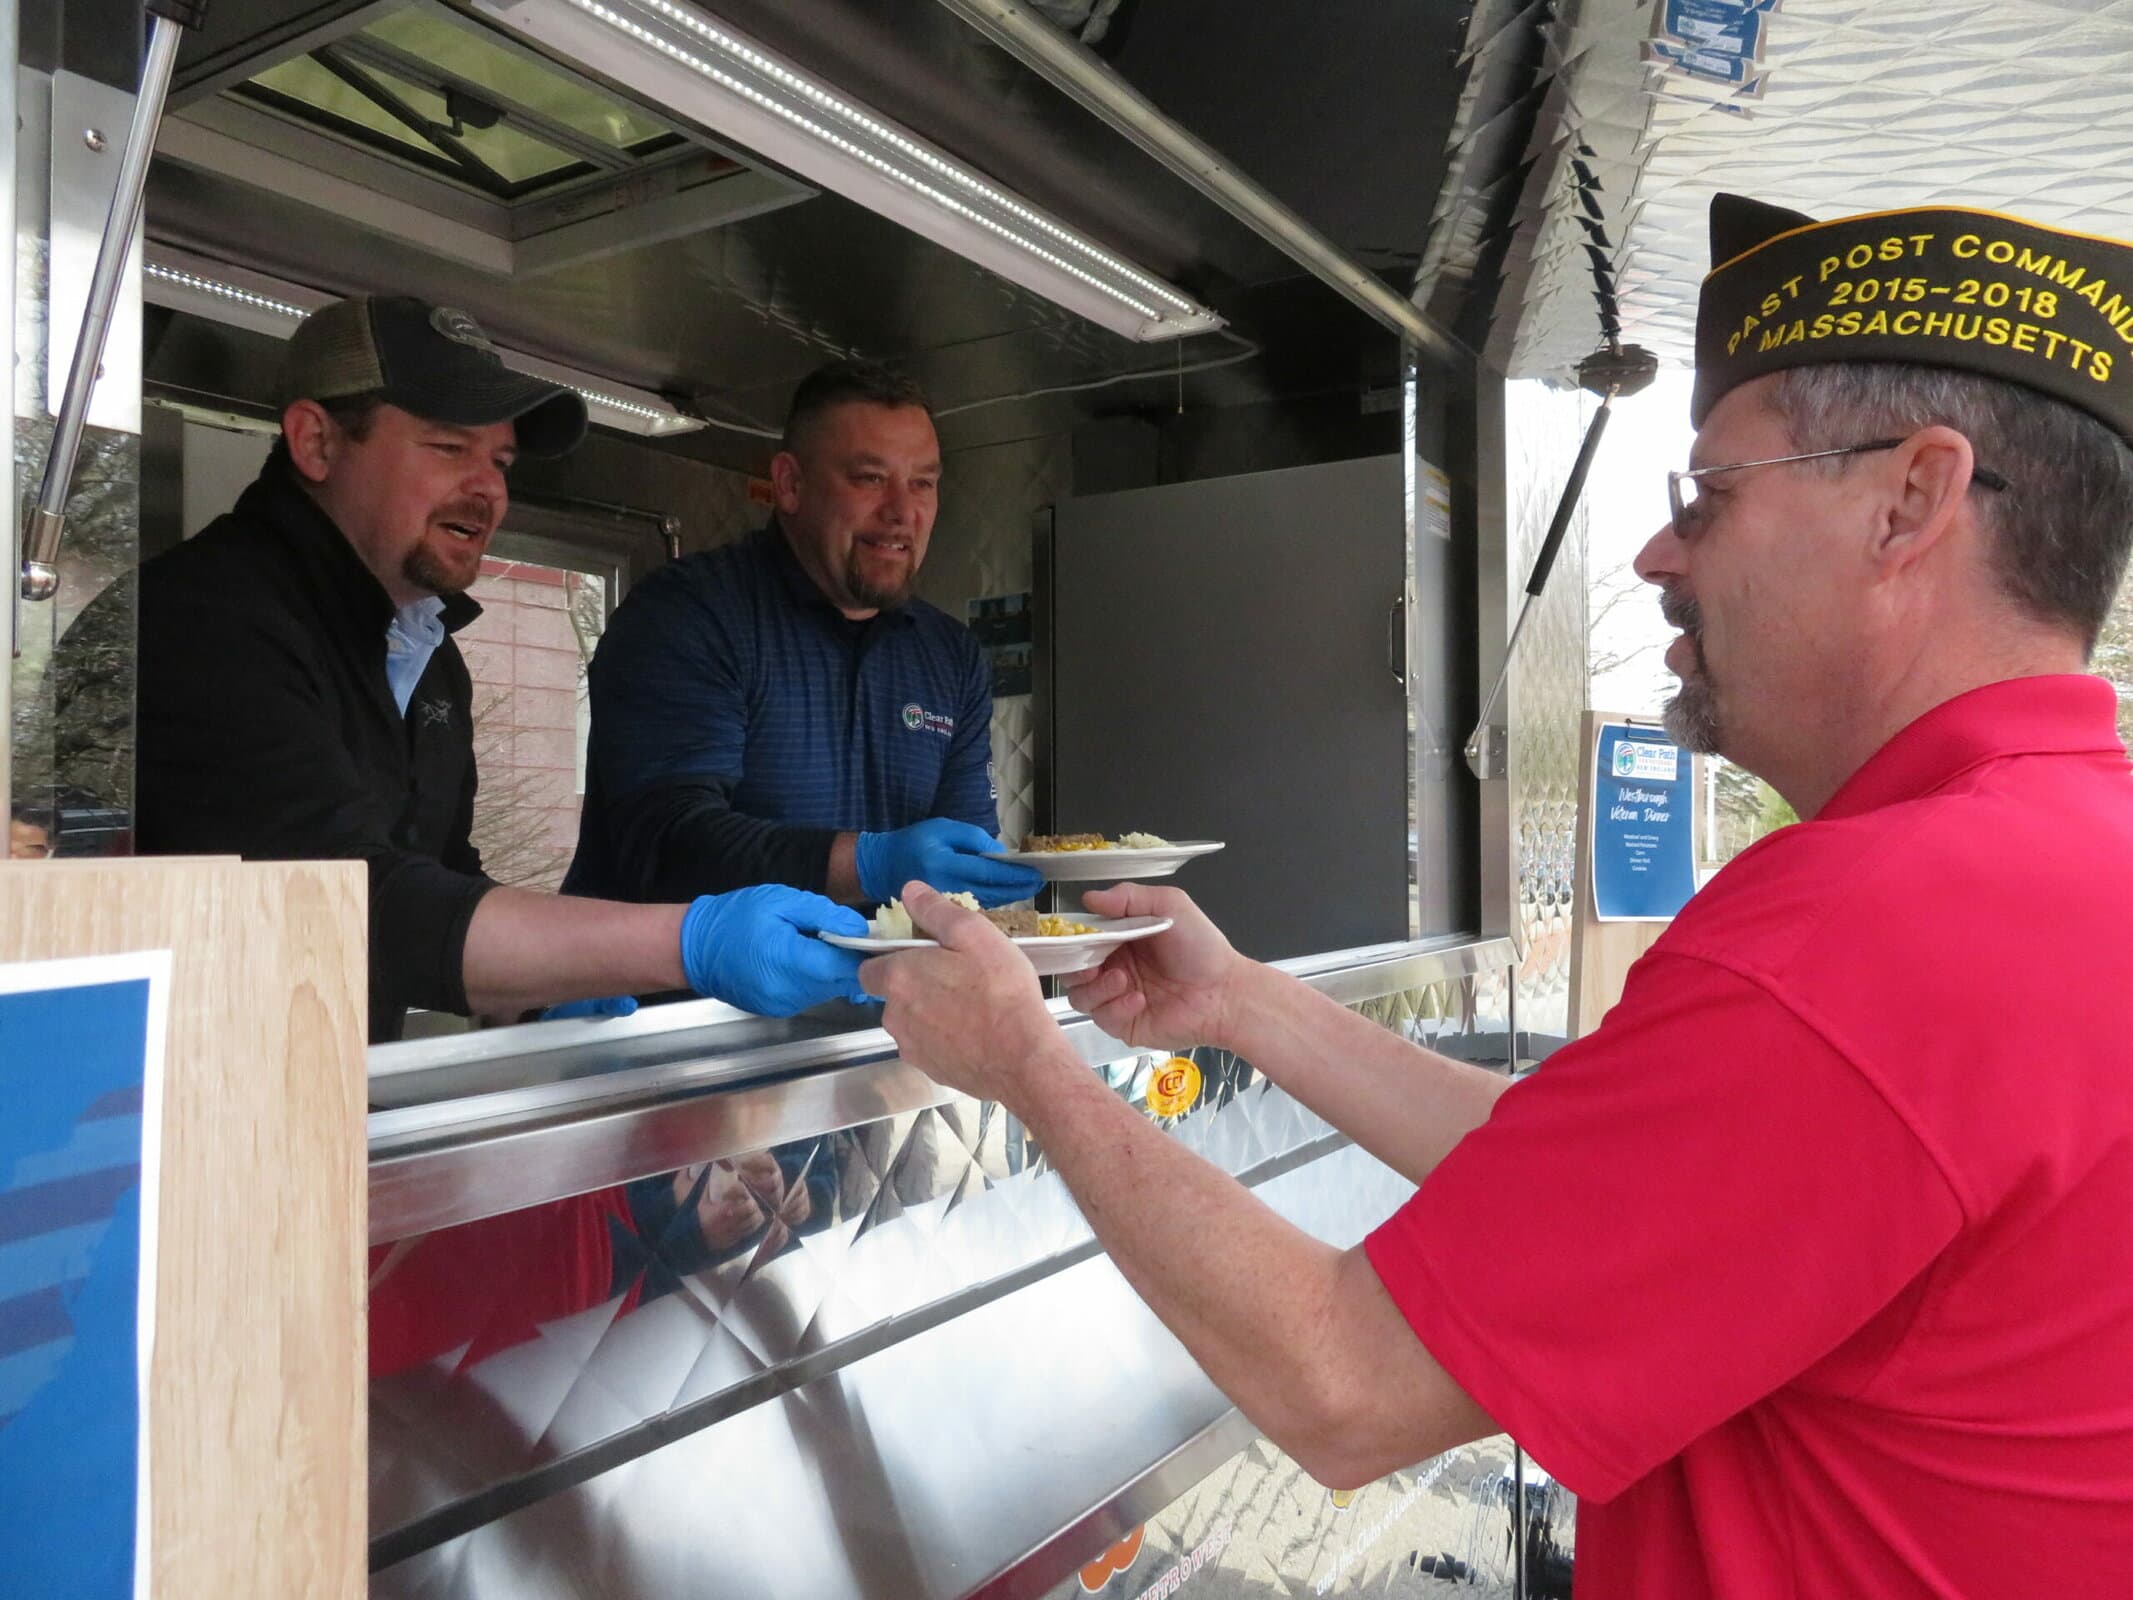 Clear Path adds mobile canteen to help veterans in need